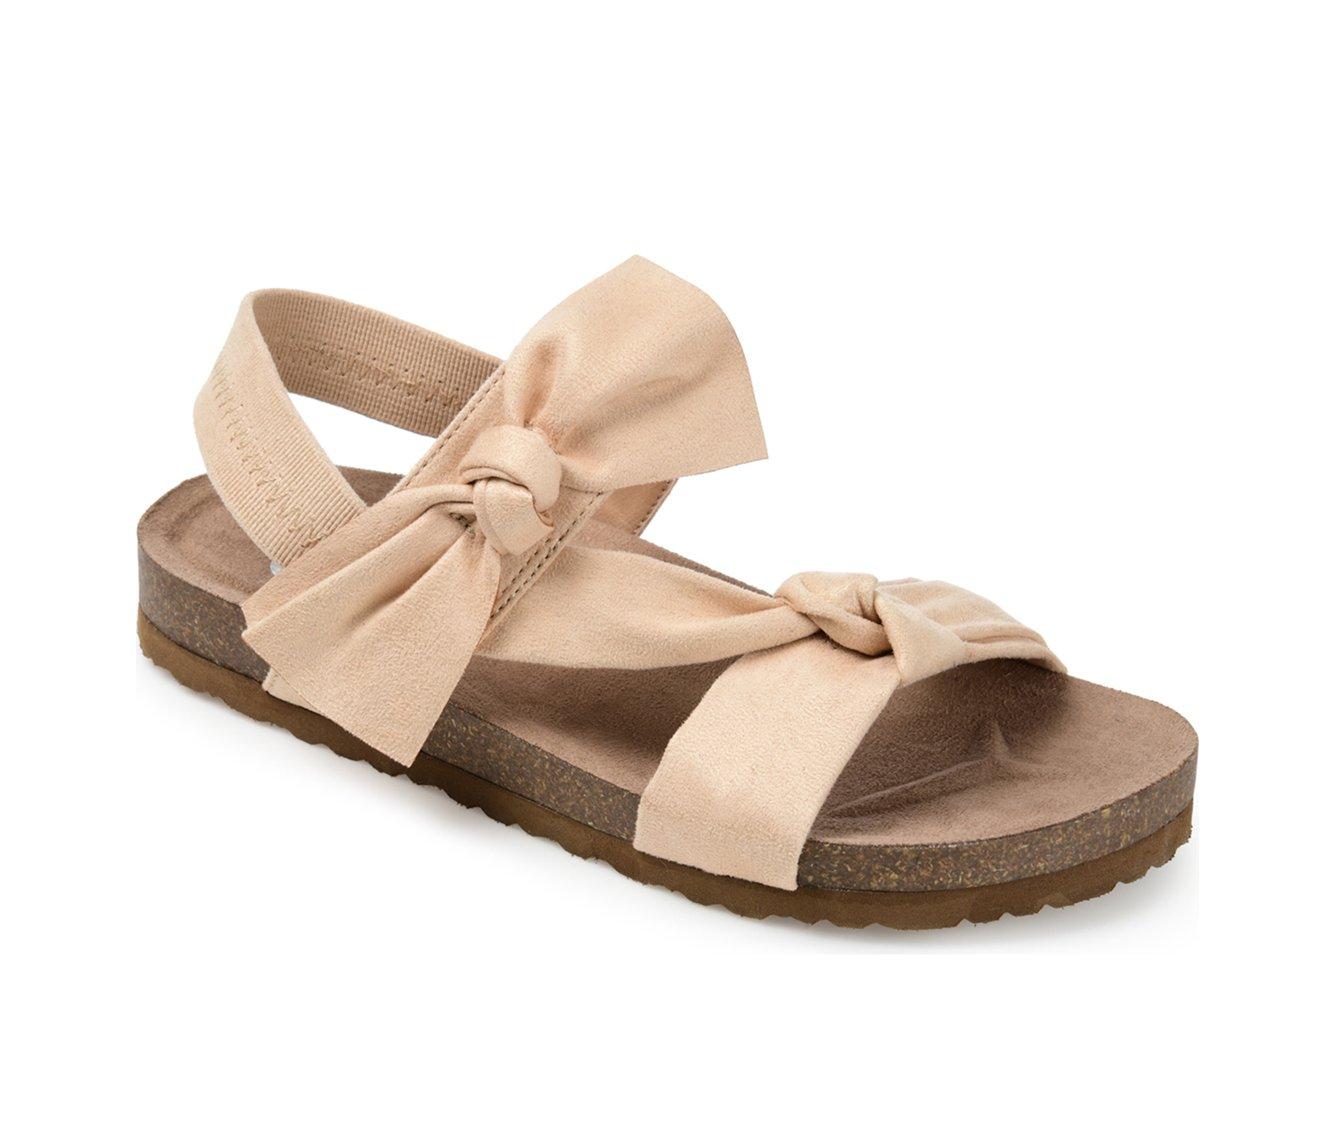 Women's Journee Collection Xanndra Footbed Sandals